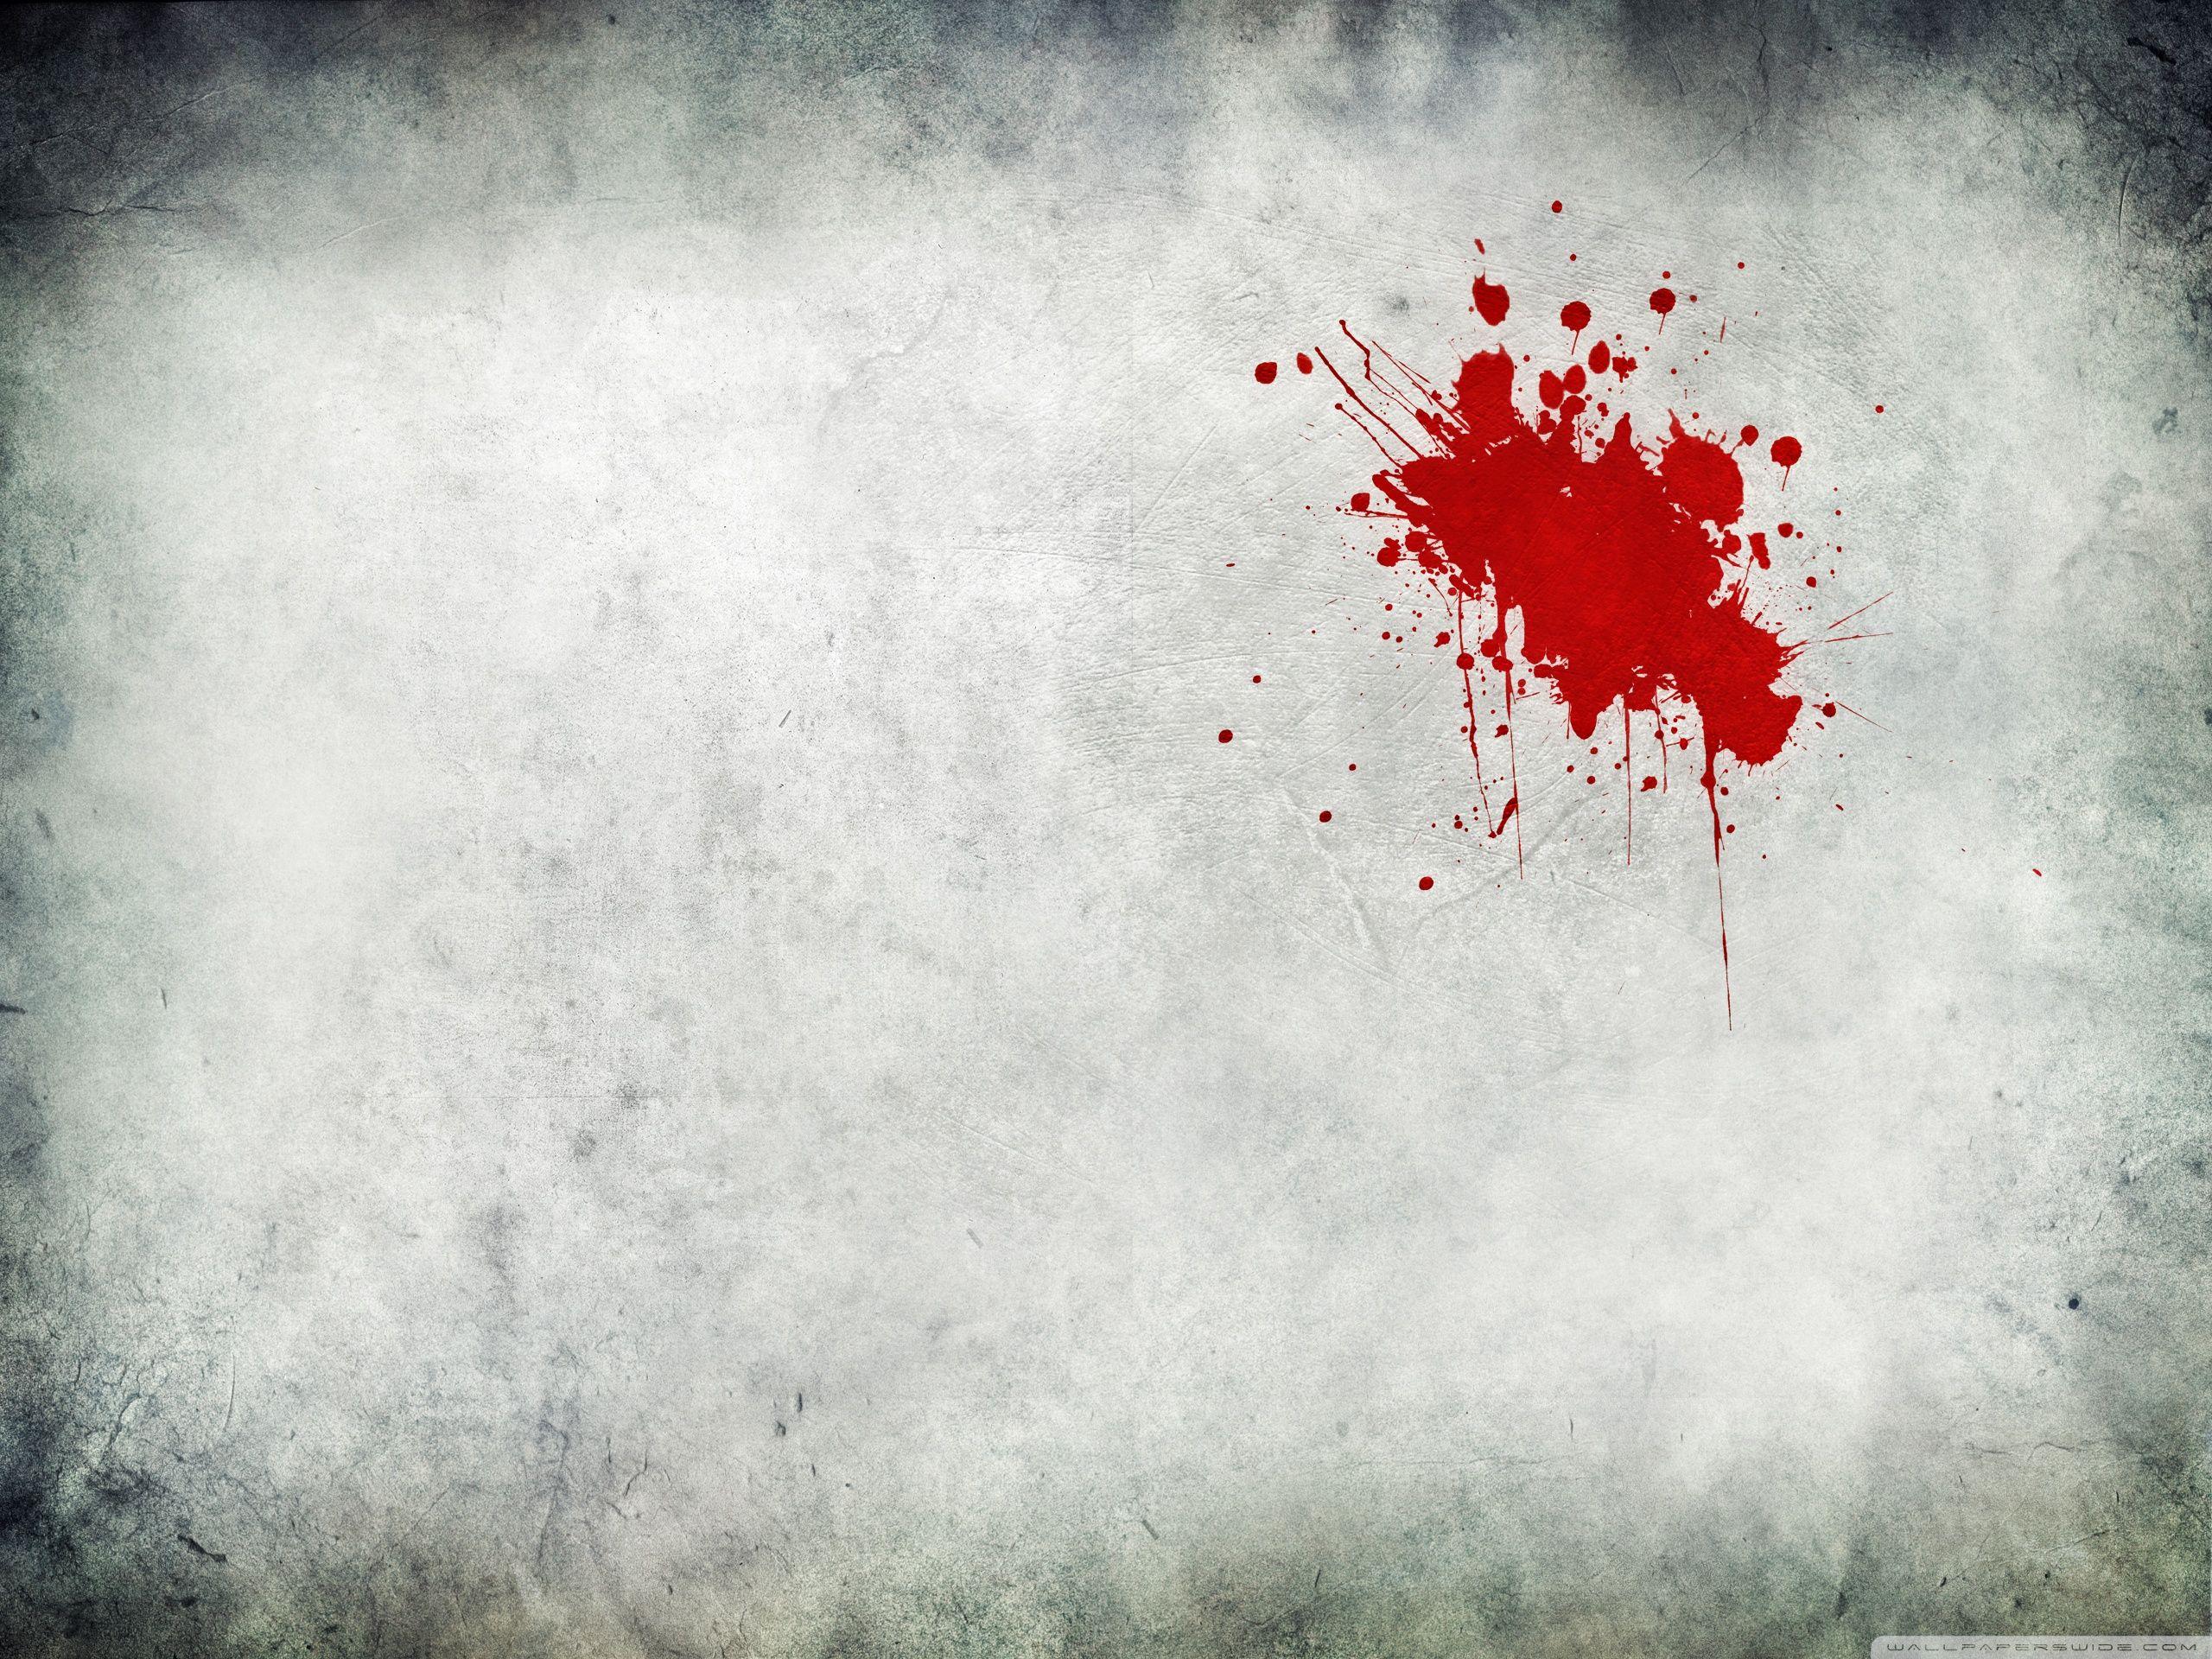 520 Blood HD Wallpapers and Backgrounds